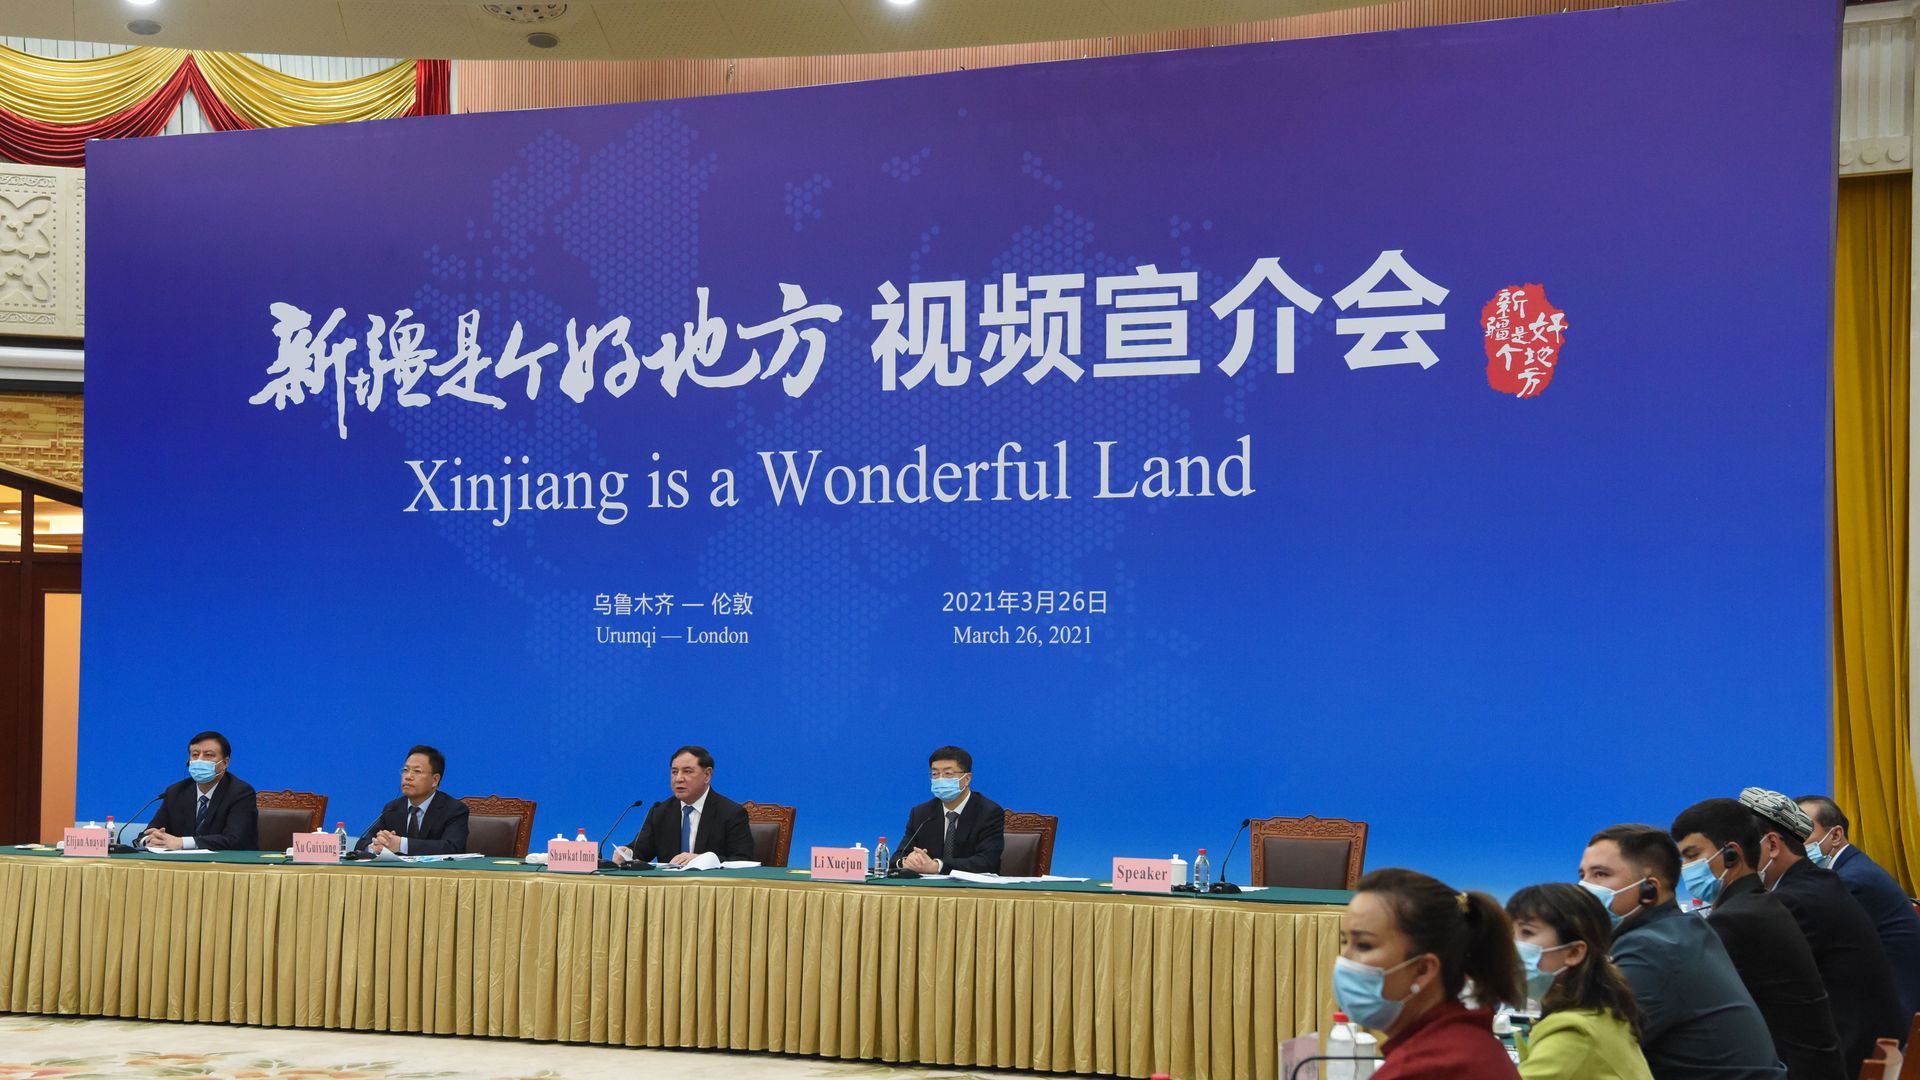 Promotion event for Xinjiang